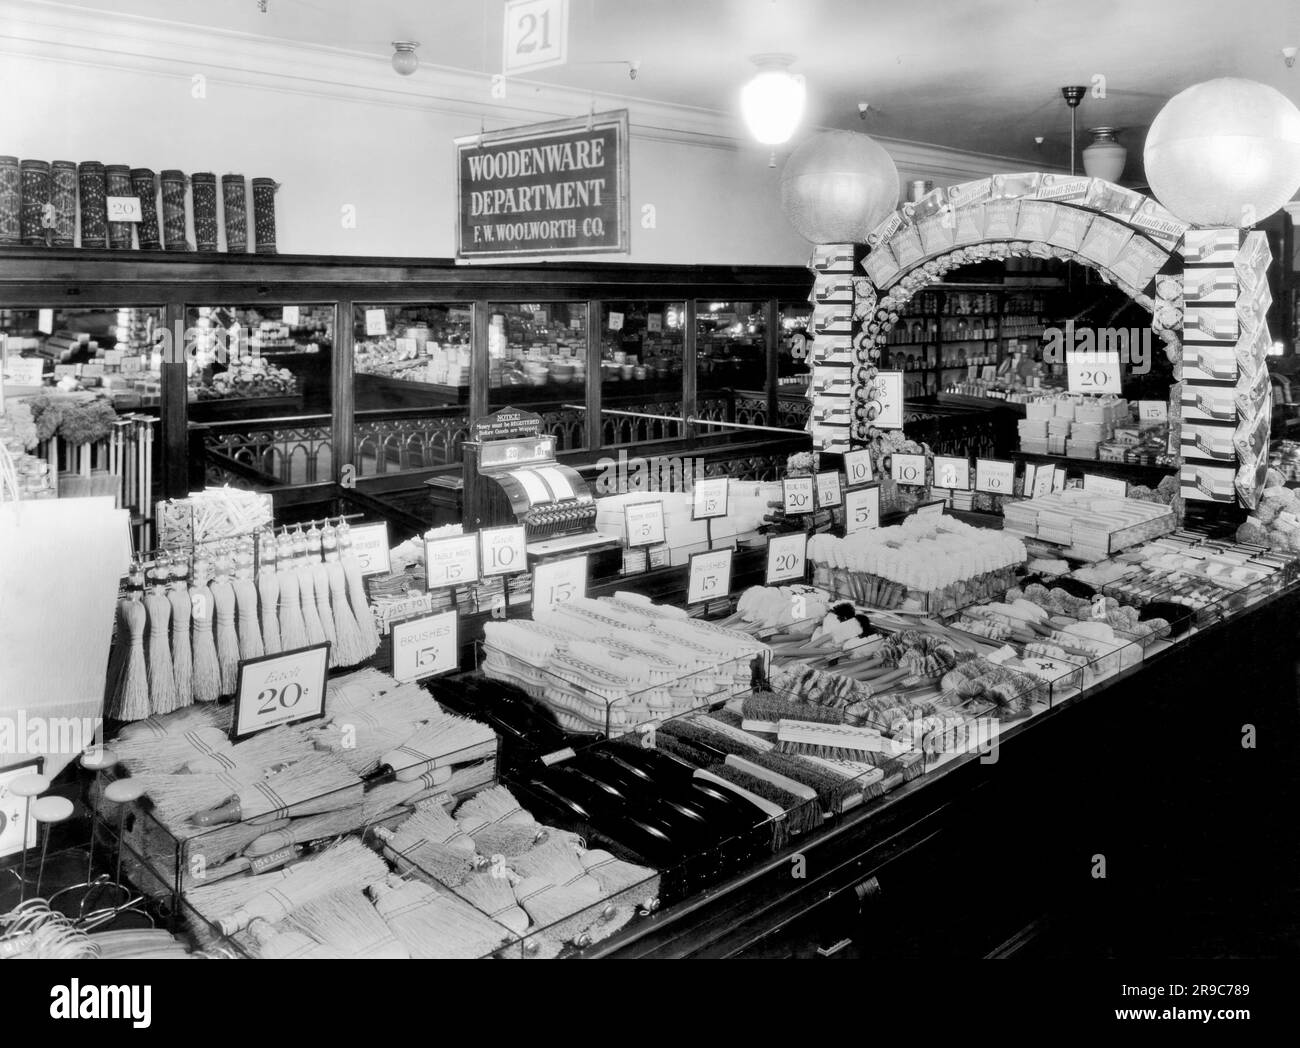 San Marino, California:  c. 1930 The woodenware department at the F.W. Woolworth Co. store. Stock Photo